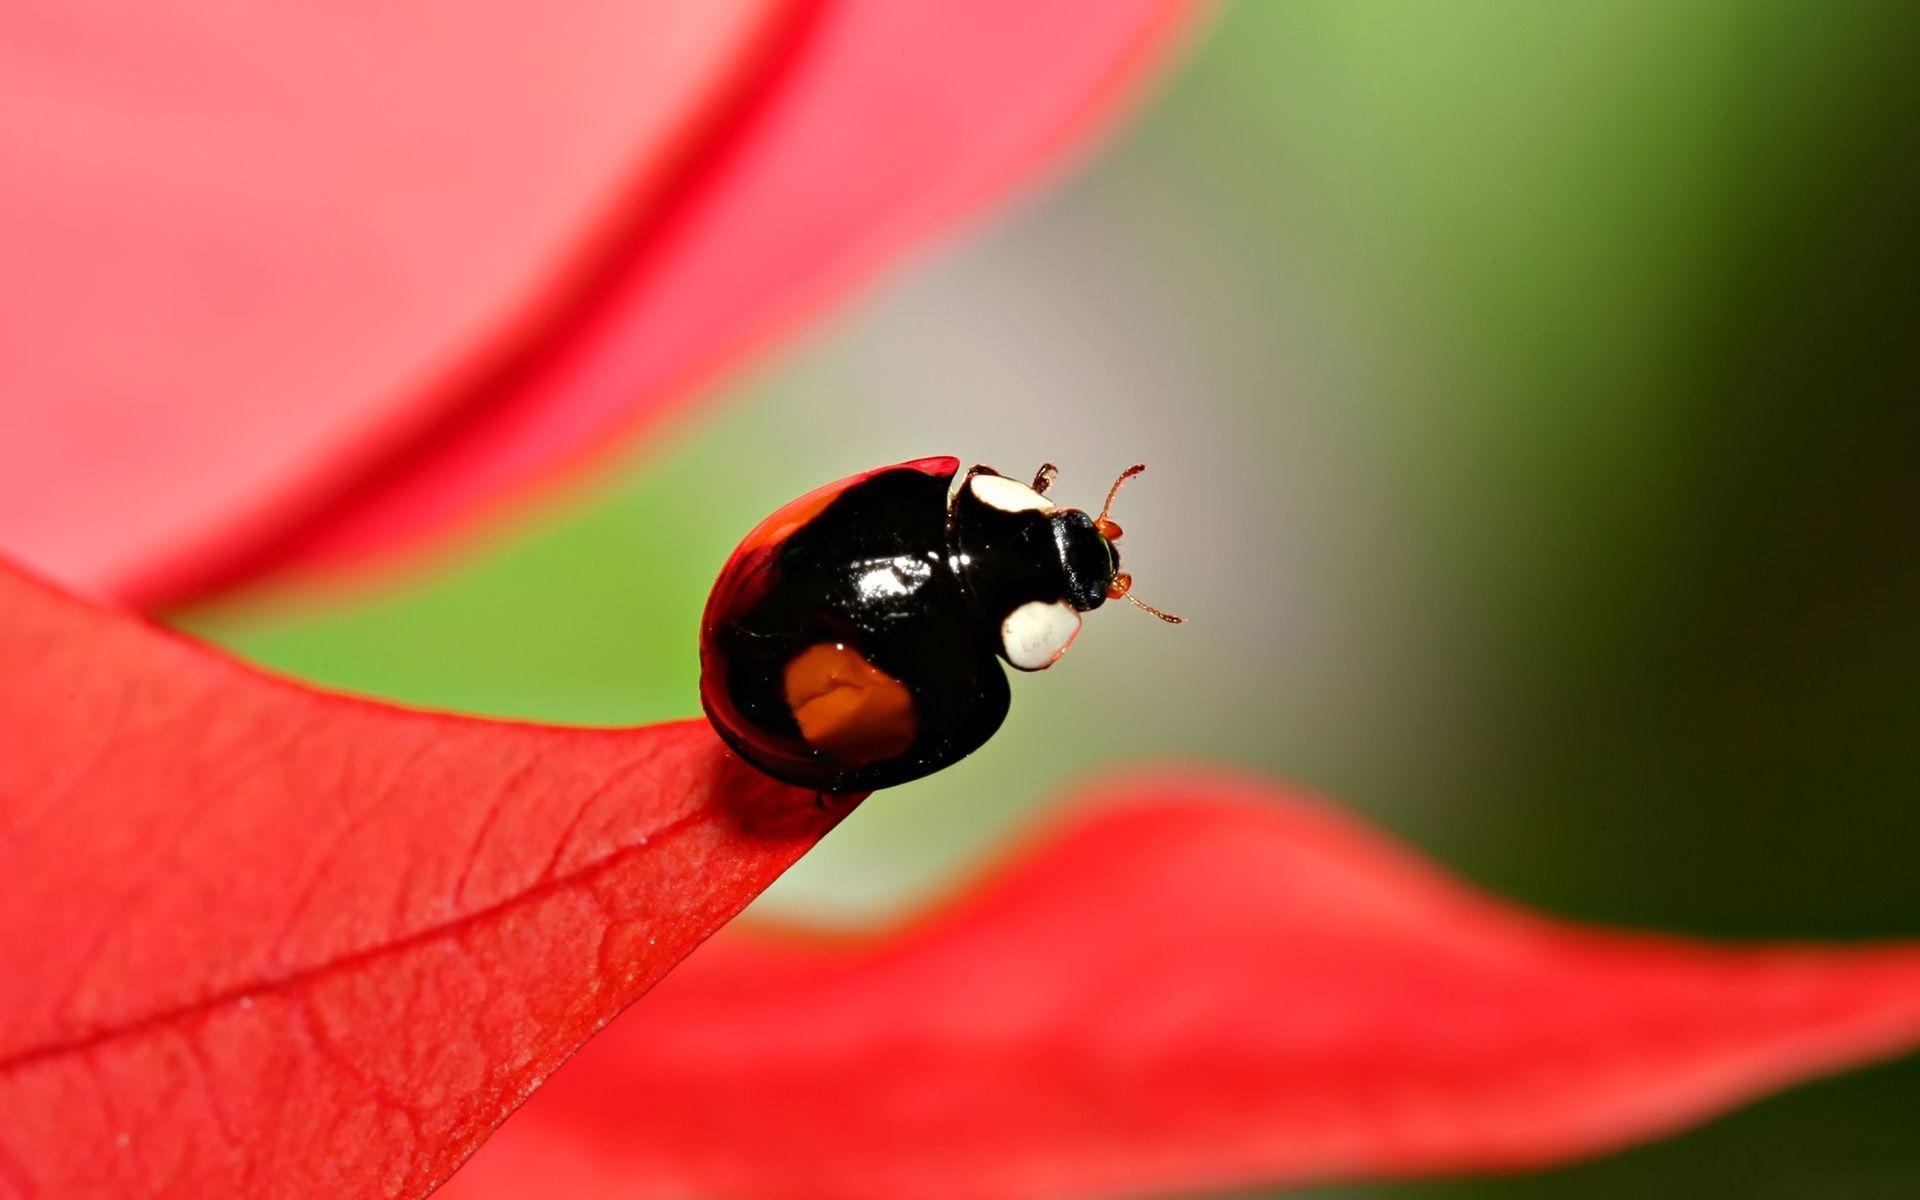 HD wallpaper of bug free download for pc or laptop HD